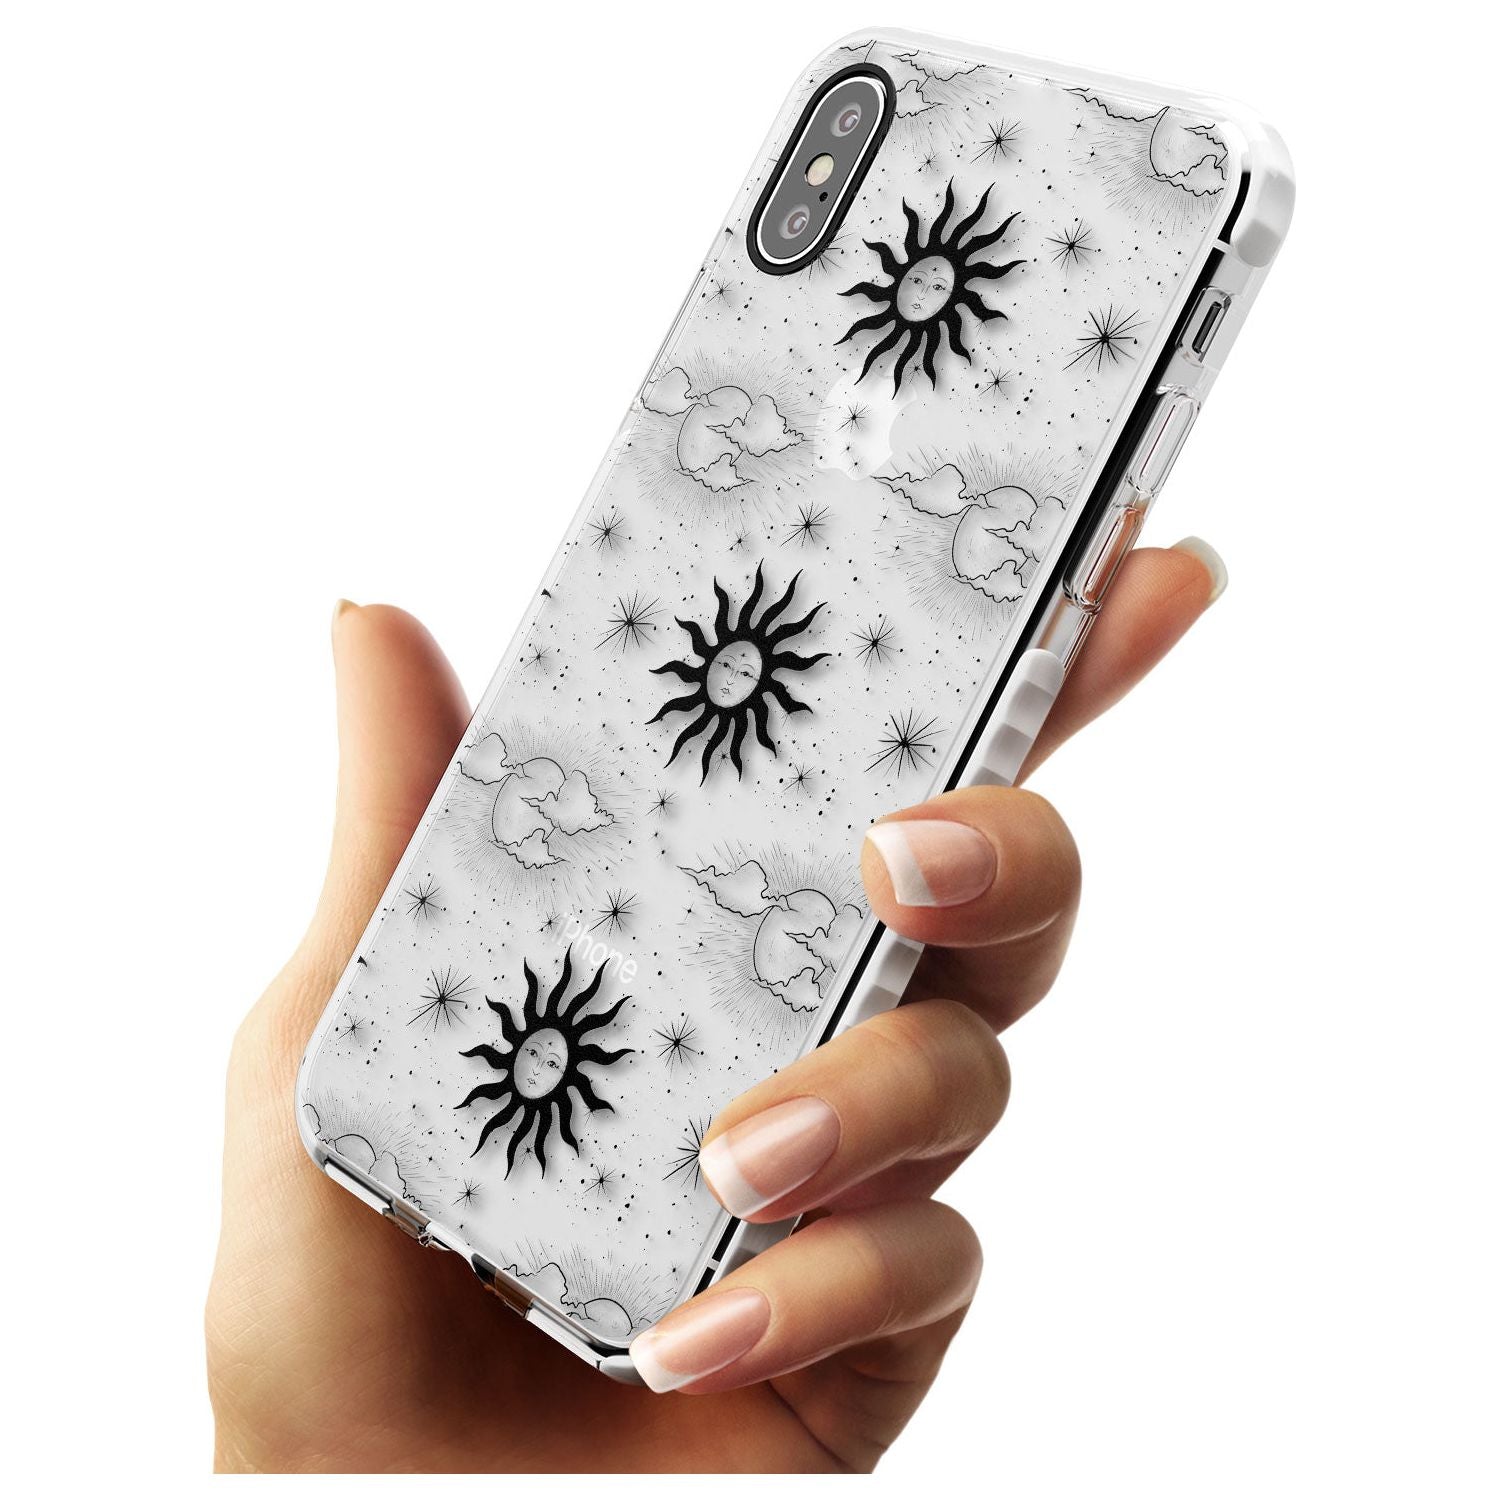 Suns & Clouds Vintage Astrological Impact Phone Case for iPhone X XS Max XR